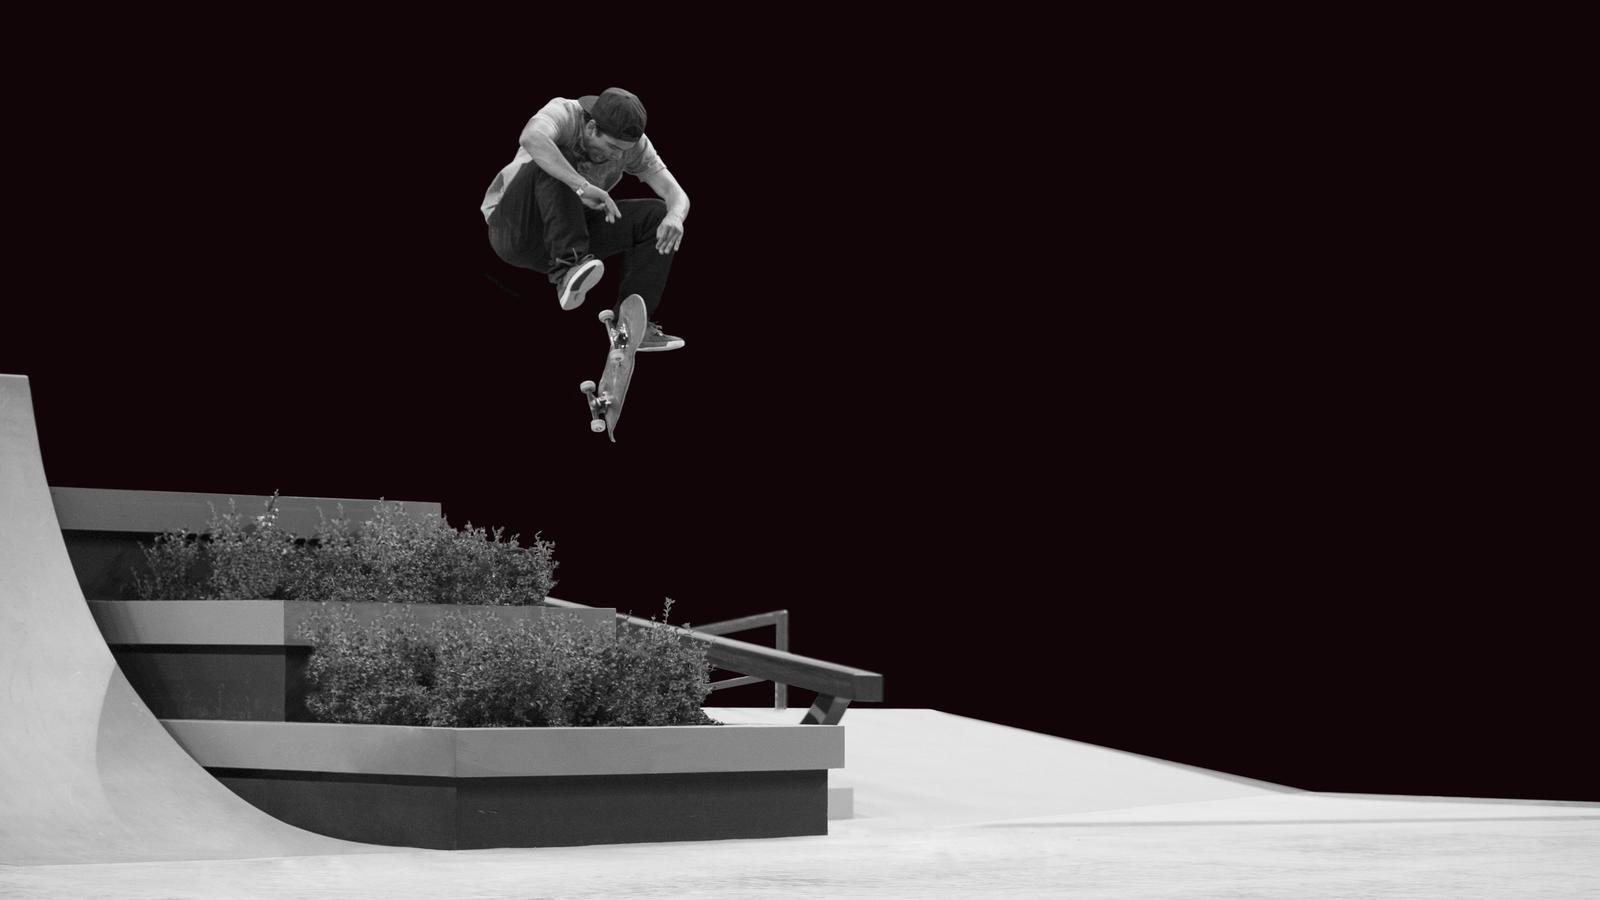 Four Nike SB Riders to Battle it Out at SLS Nike SB World Tour